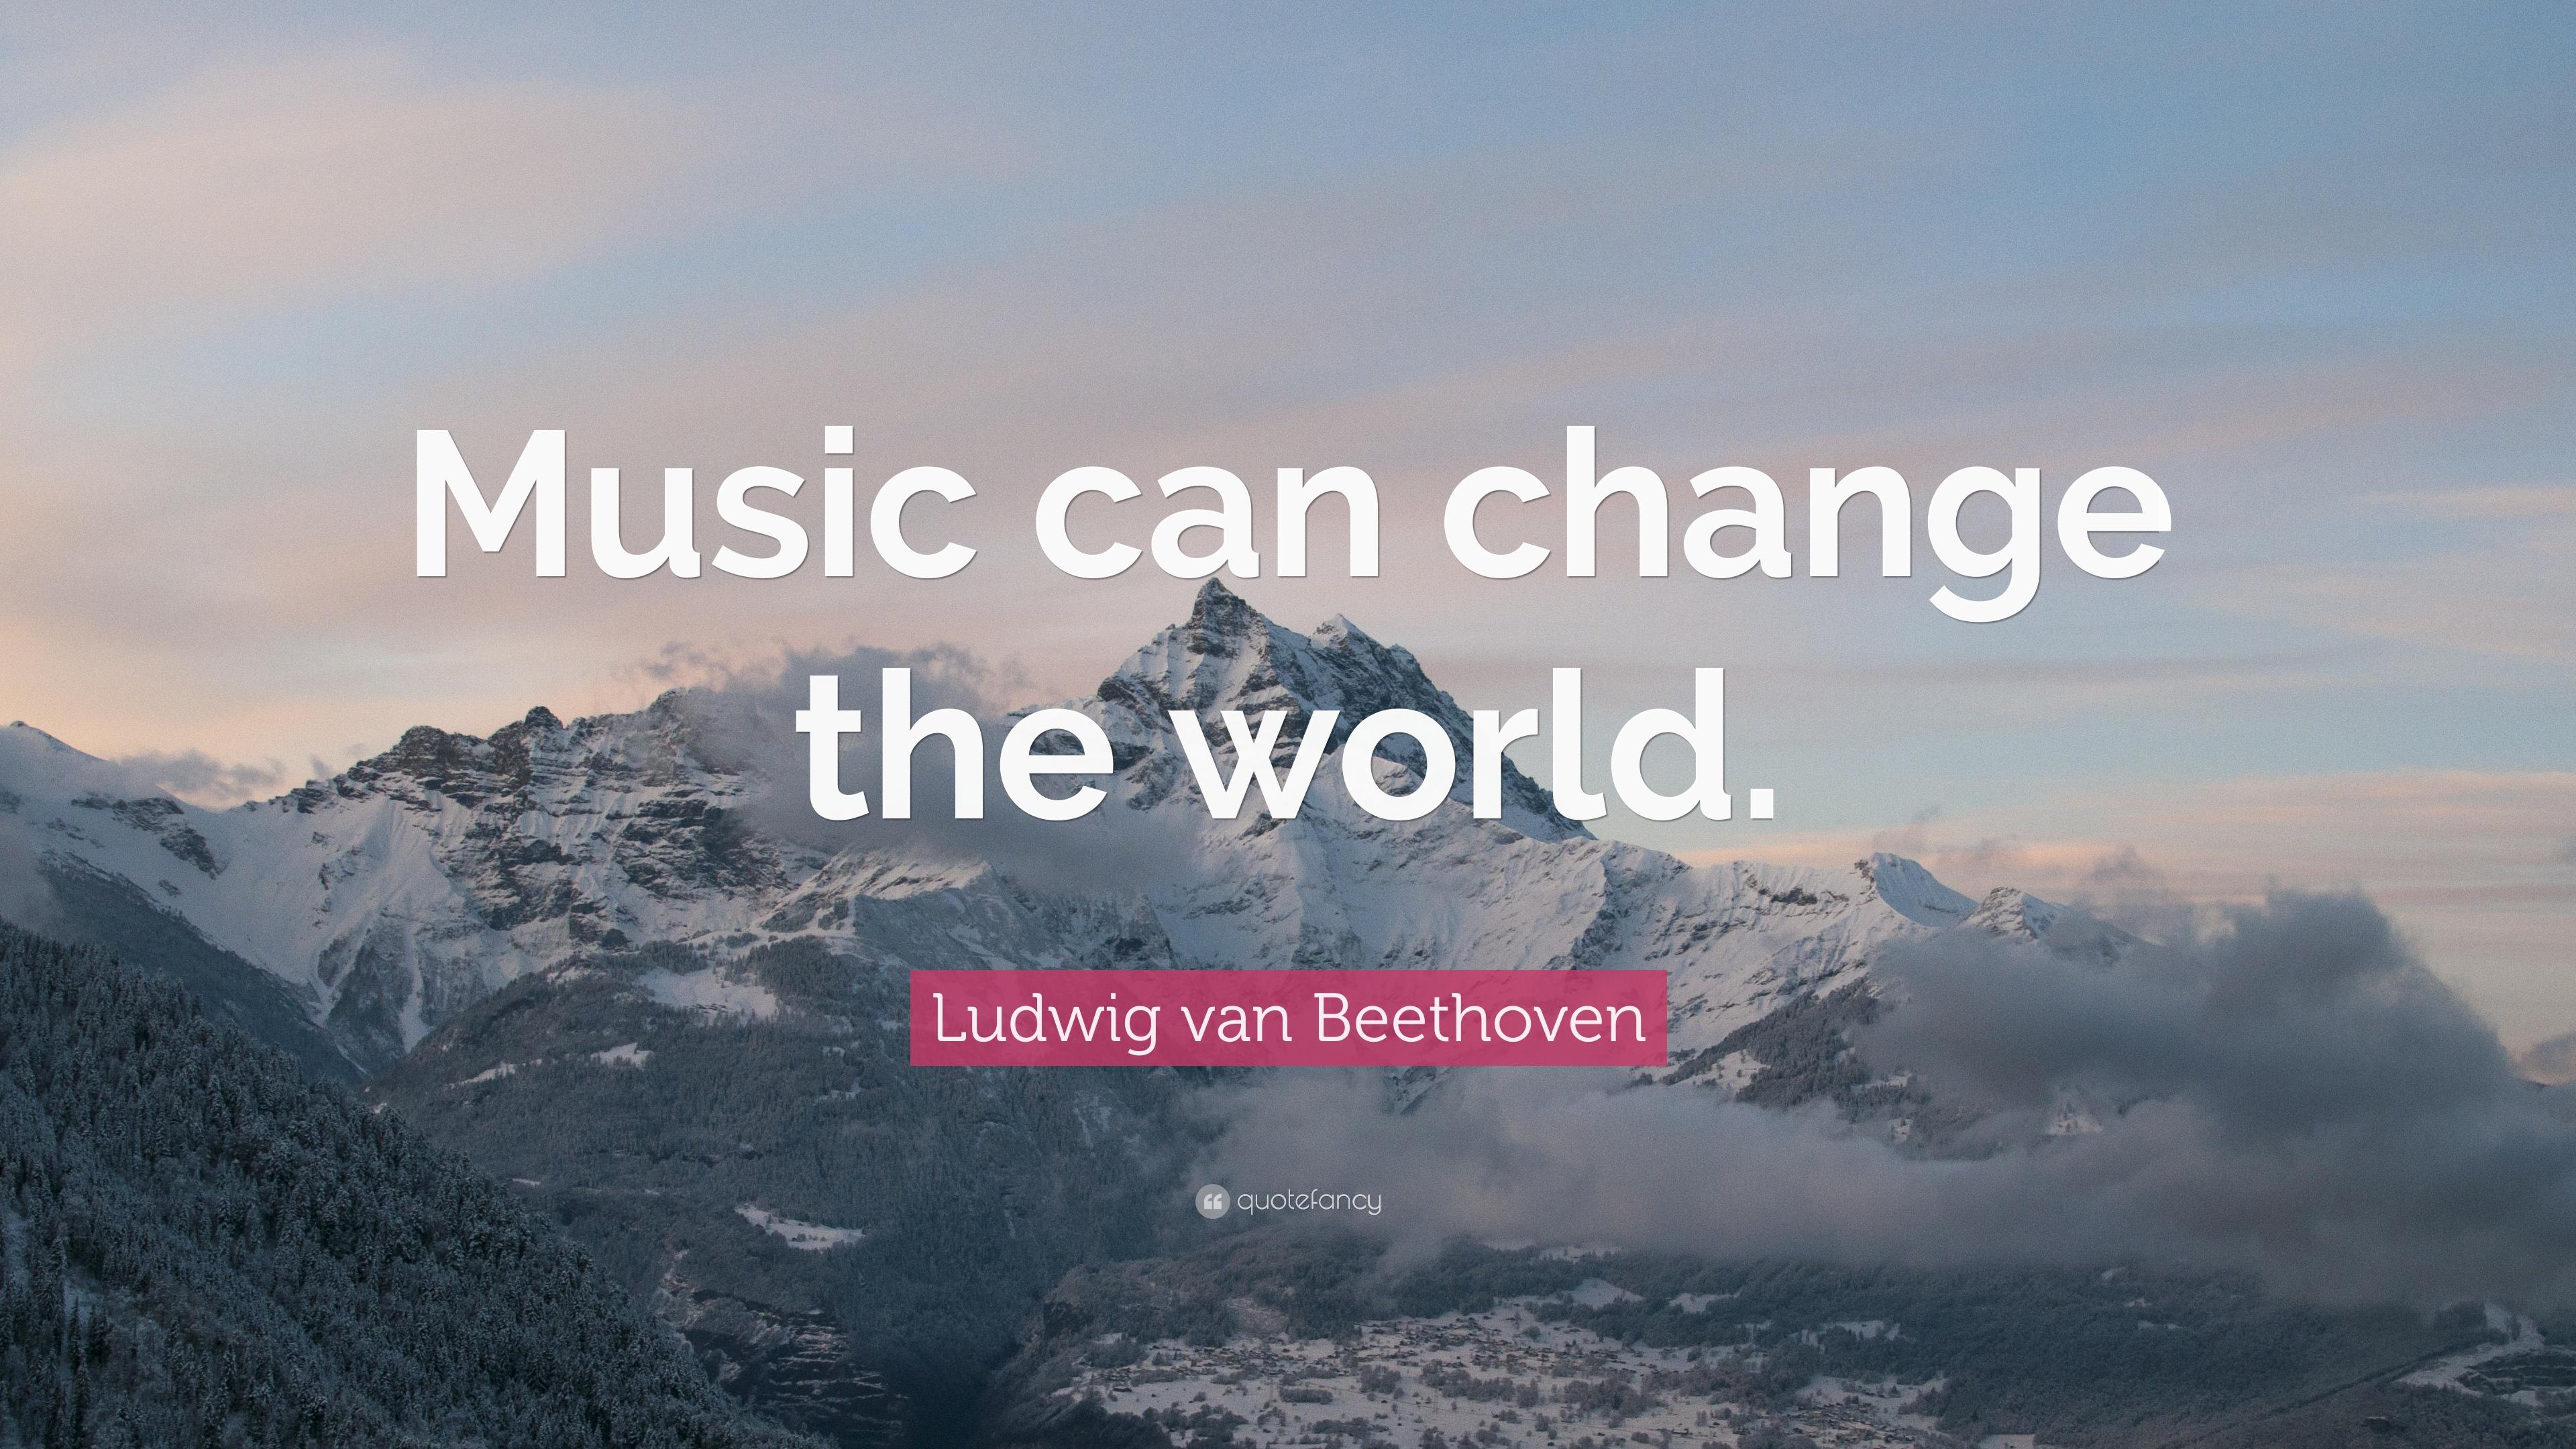 Ludwig van Beethoven Quote: “Music can change the world.” 12